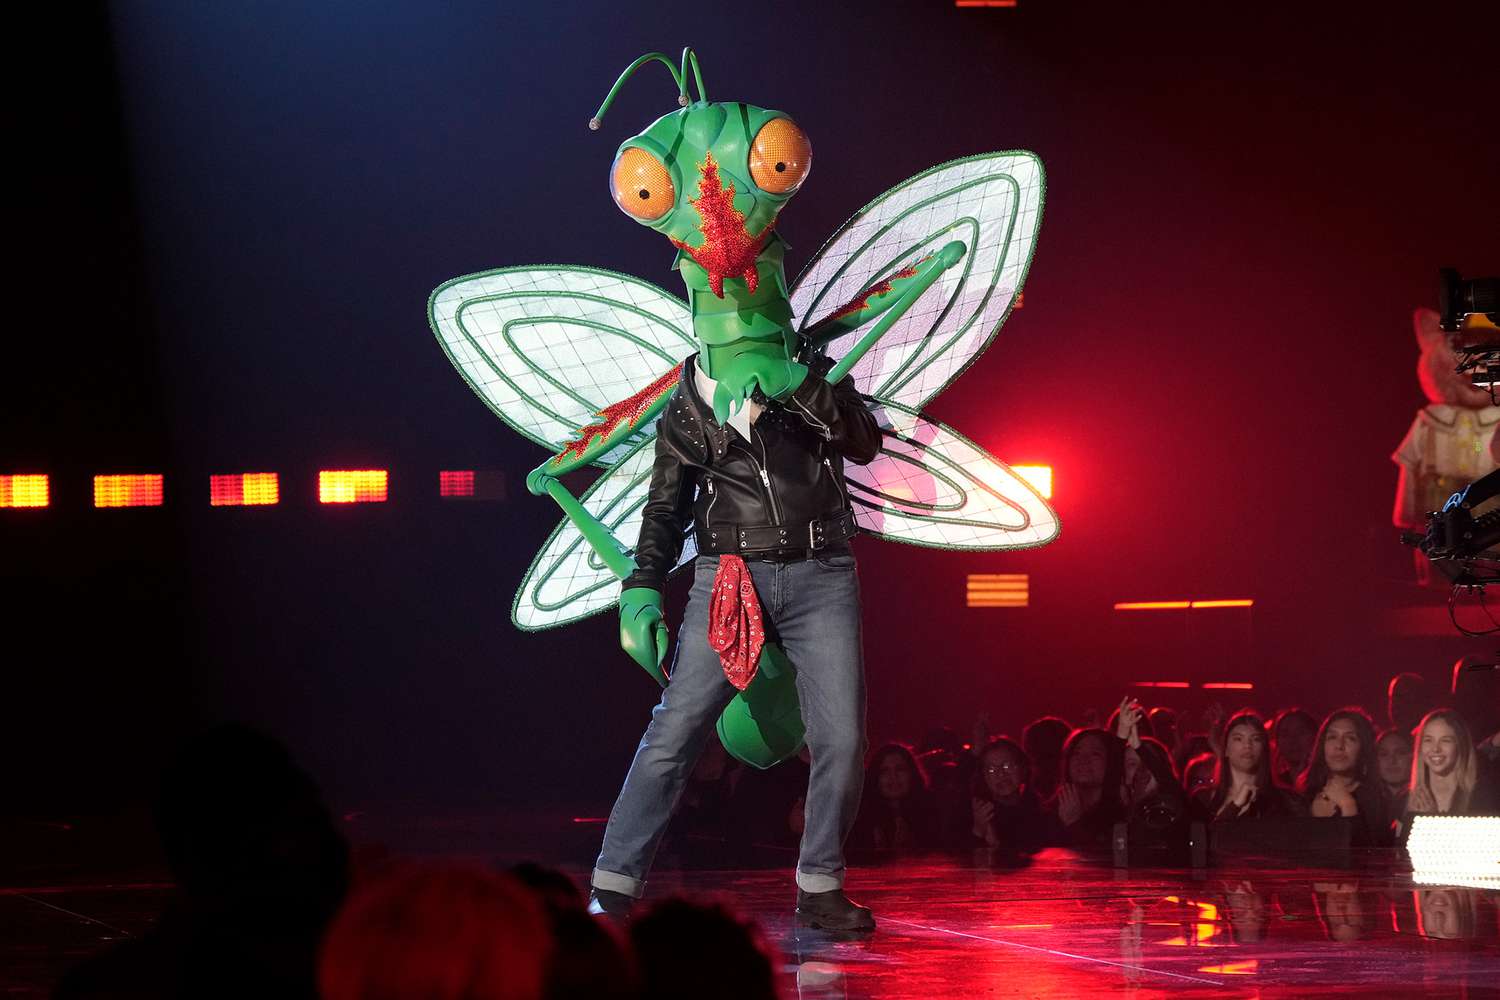 THE MASKED SINGER: Mantis in the “Battle of the Saved” episode of THE MASKED SINGER airing Wednesday, April 26